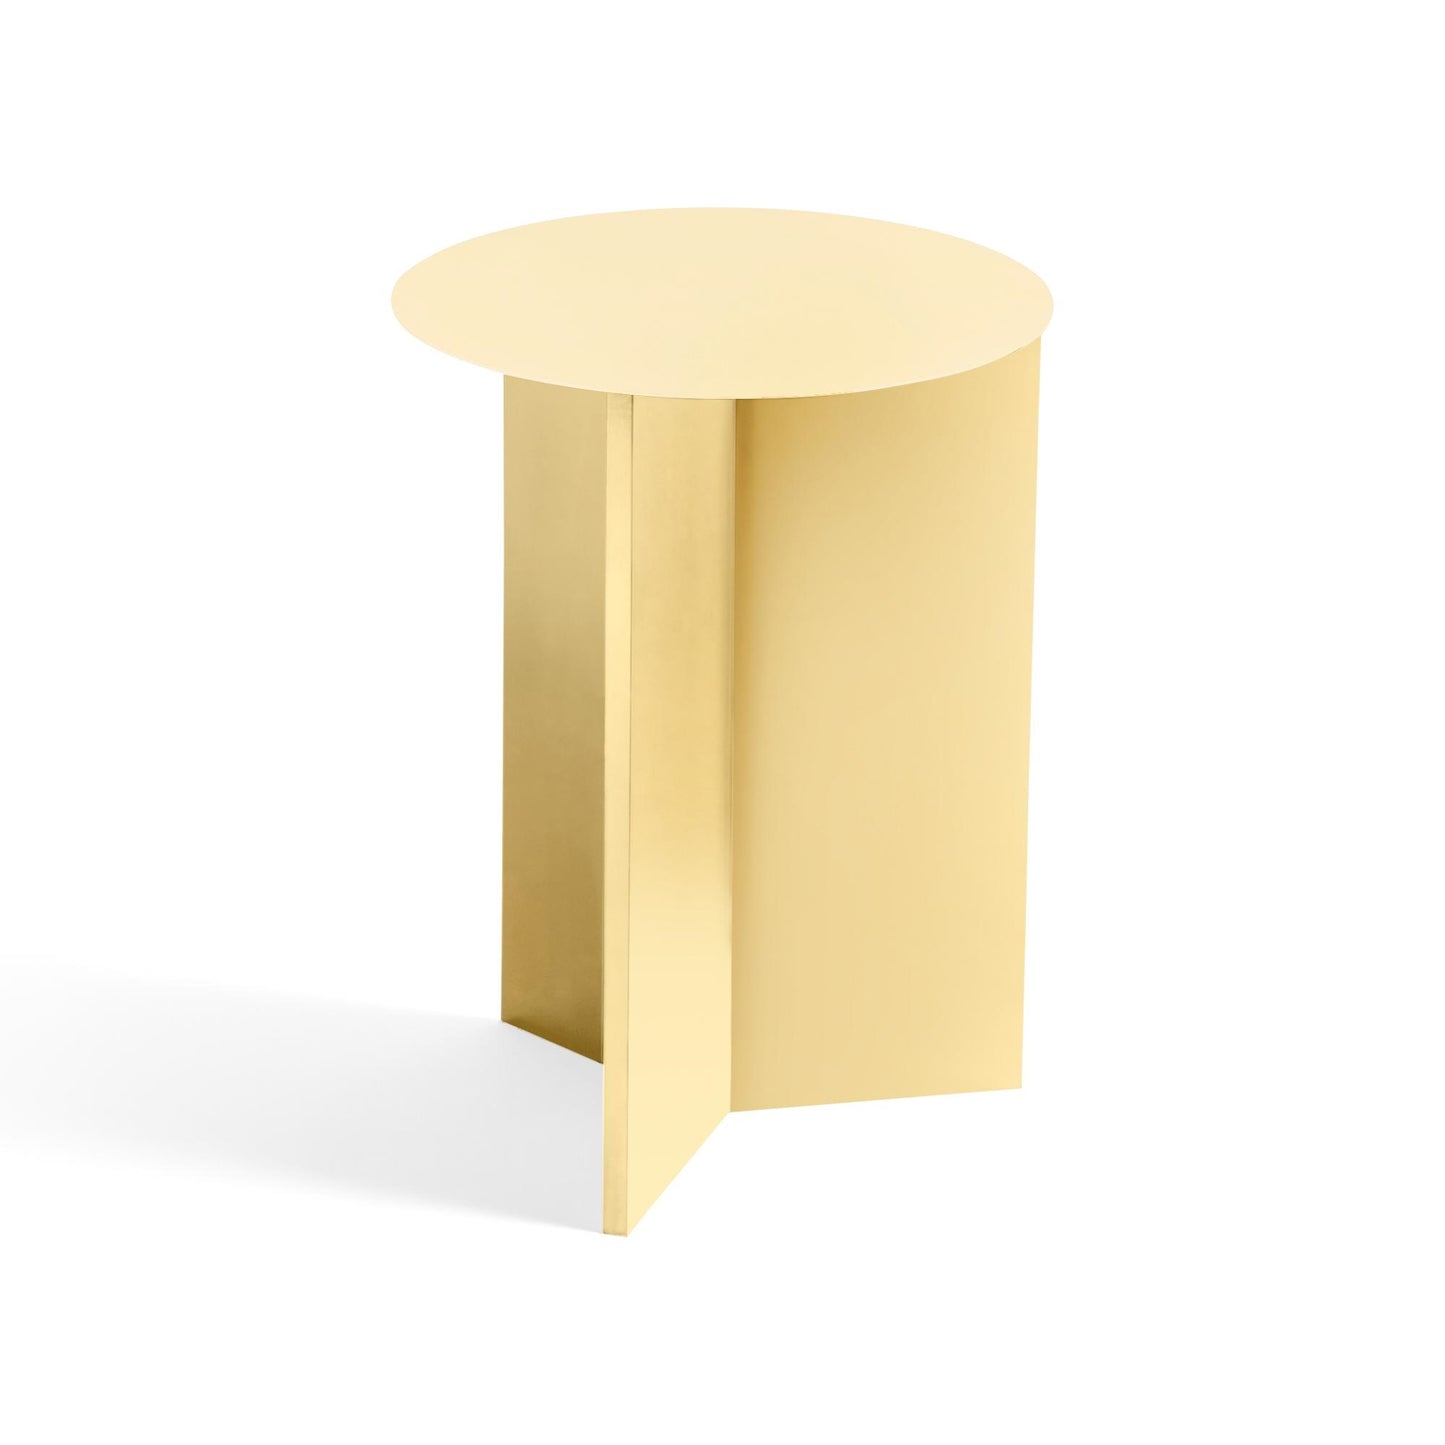 Slit Coffee Table Round Ø35 by HAY #Light Yellow